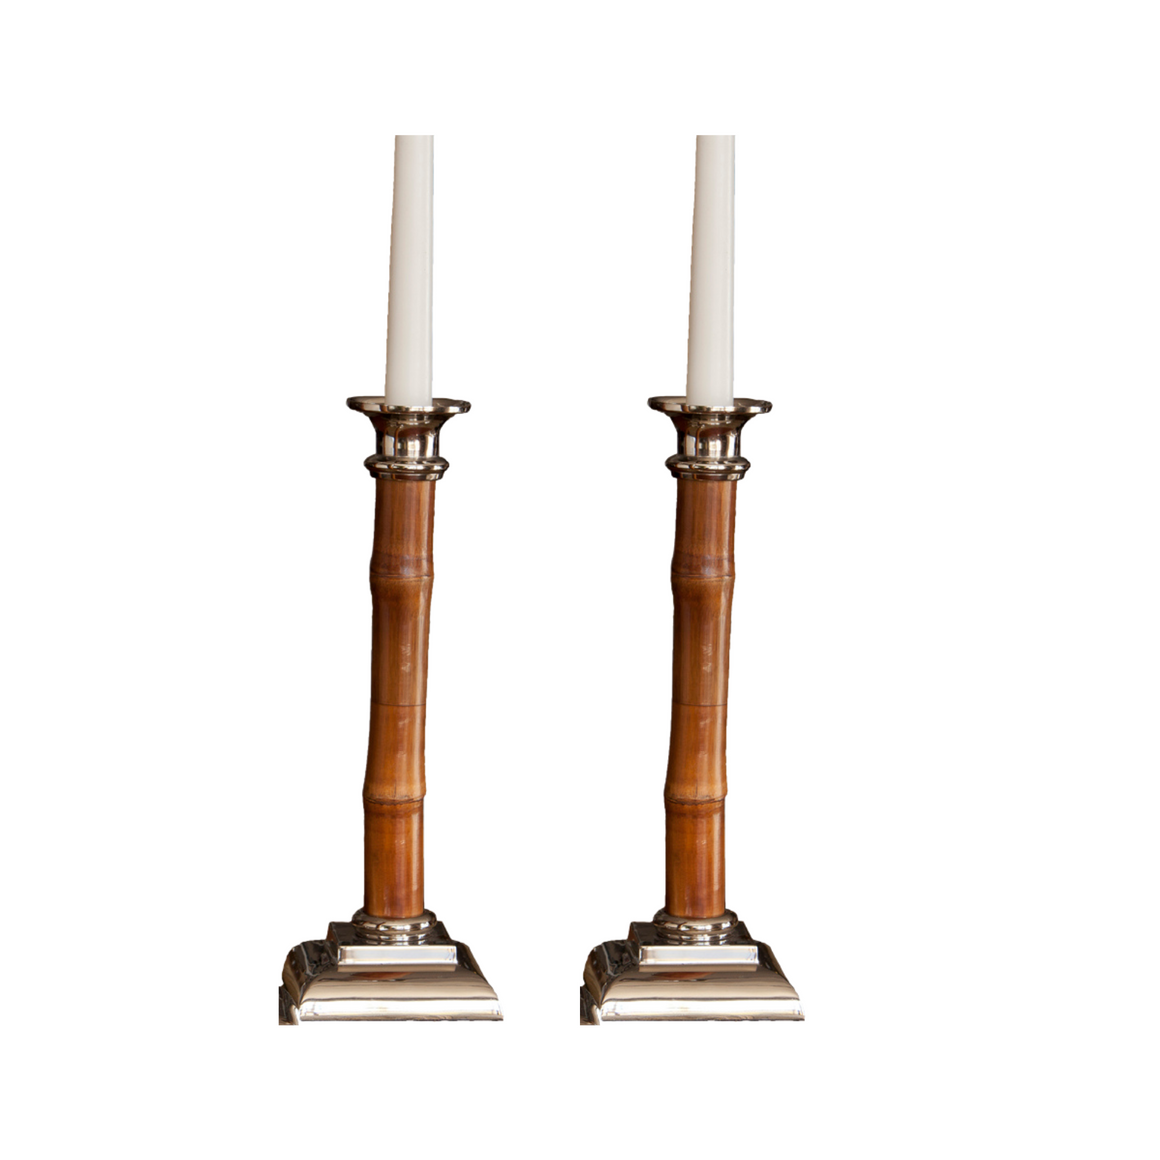 This lovely pair of candleholders with their beautiful warm-colored bamboo and polished nickel finish will add a refined yet cozy ambiance to your home. Three sizes to choose from. Use as a table centerpiece, place on either end of a mantel, or create an elegant display using all three sizes. 